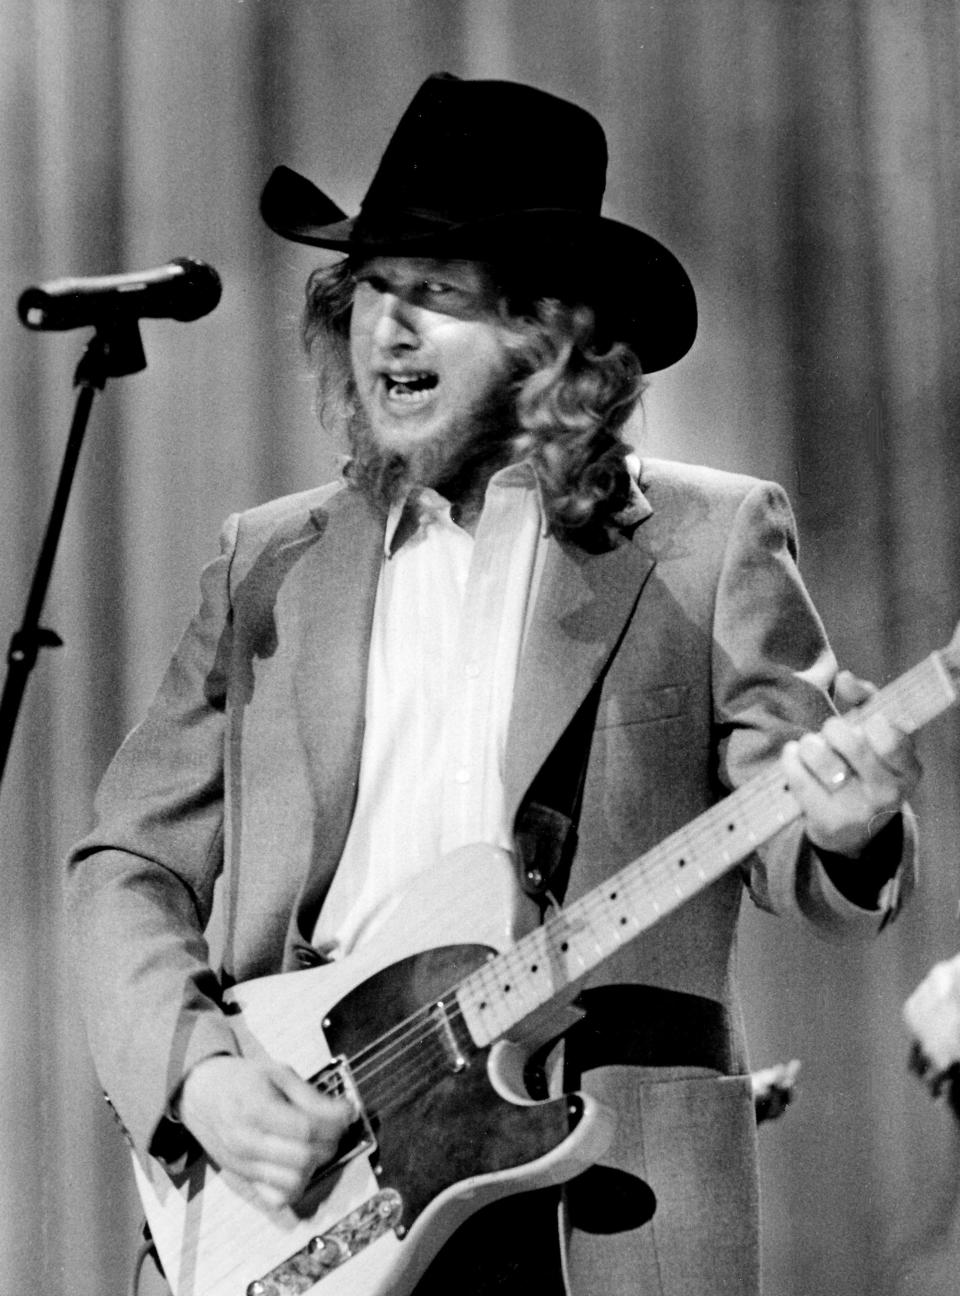 Warner Bros. Records' John Anderson performs the 1983 Top Country Song of the Year, "Swingin'," during the annual Music City News Awards show Jan. 18, 1984 at TPAC. The artist co-wrote the smash hit with his buddy, Lionel Delmore.